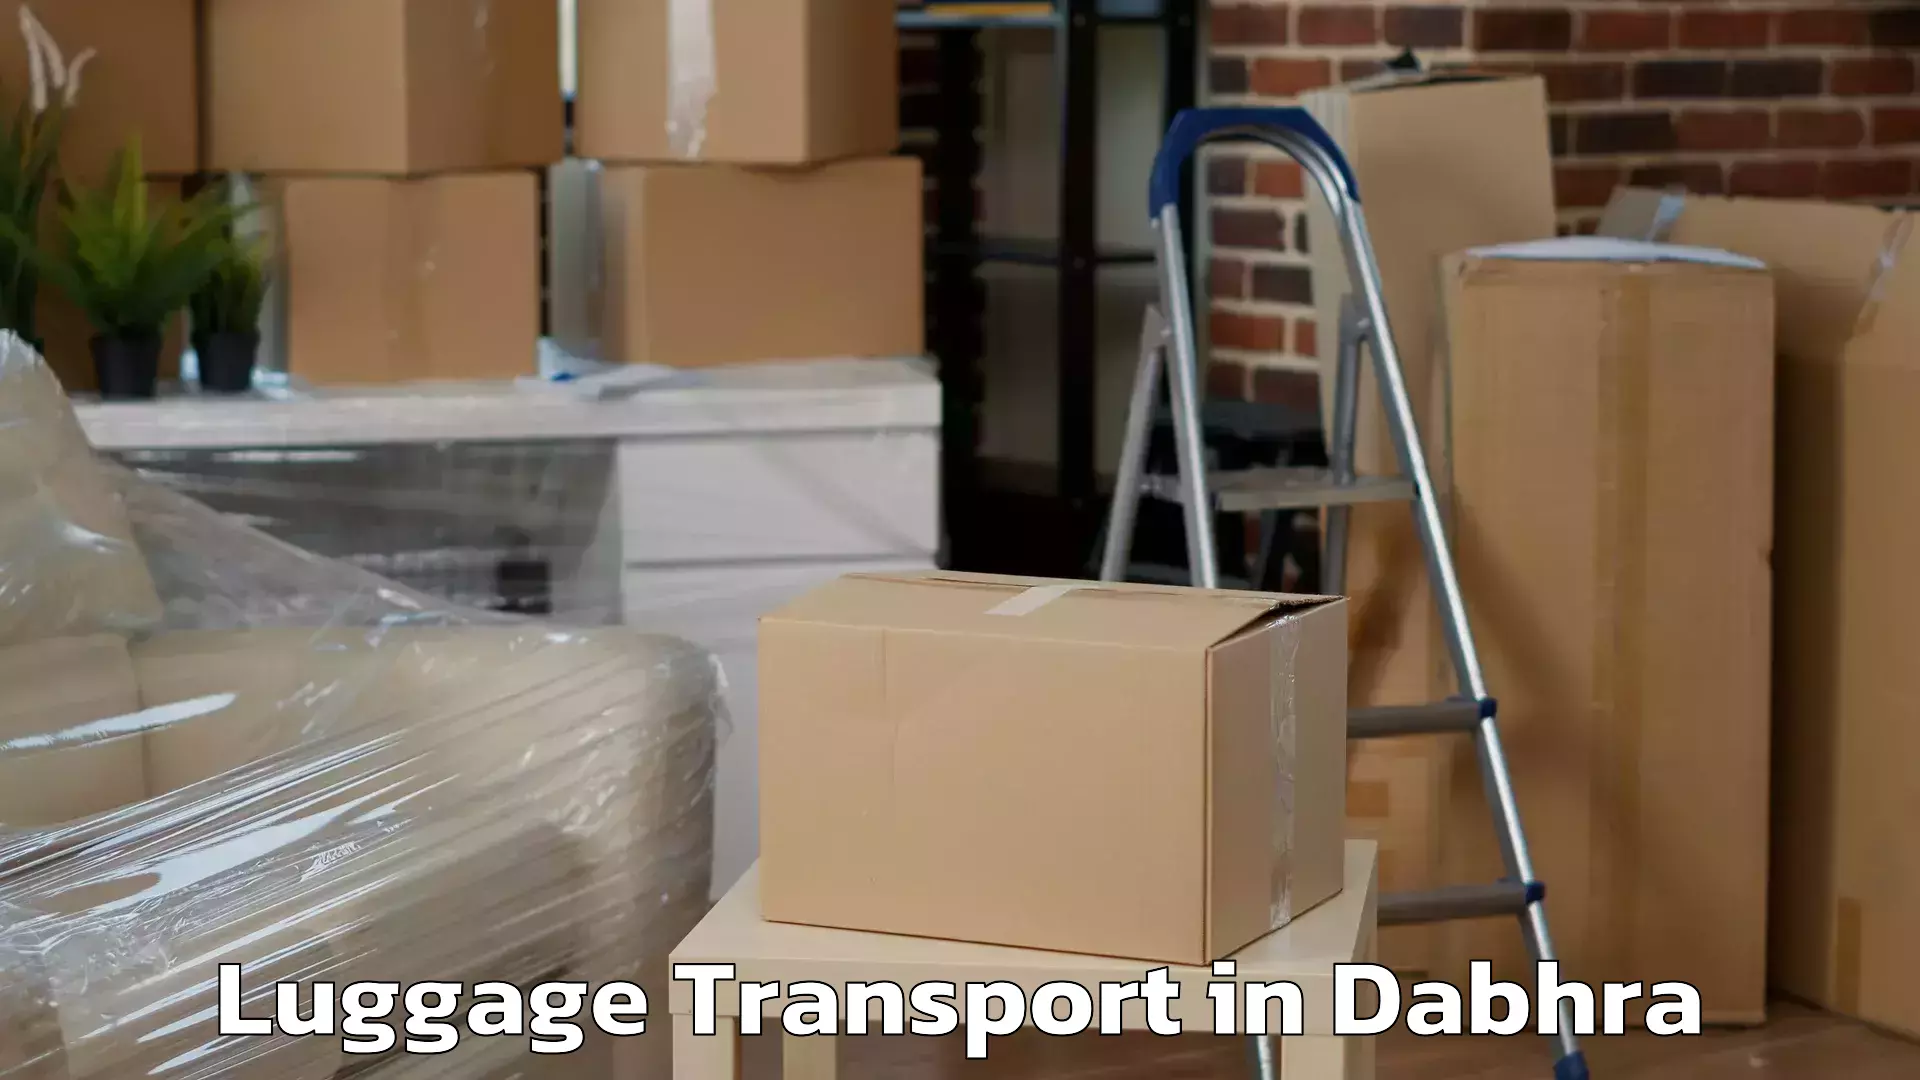 Luggage transport tips in Dabhra